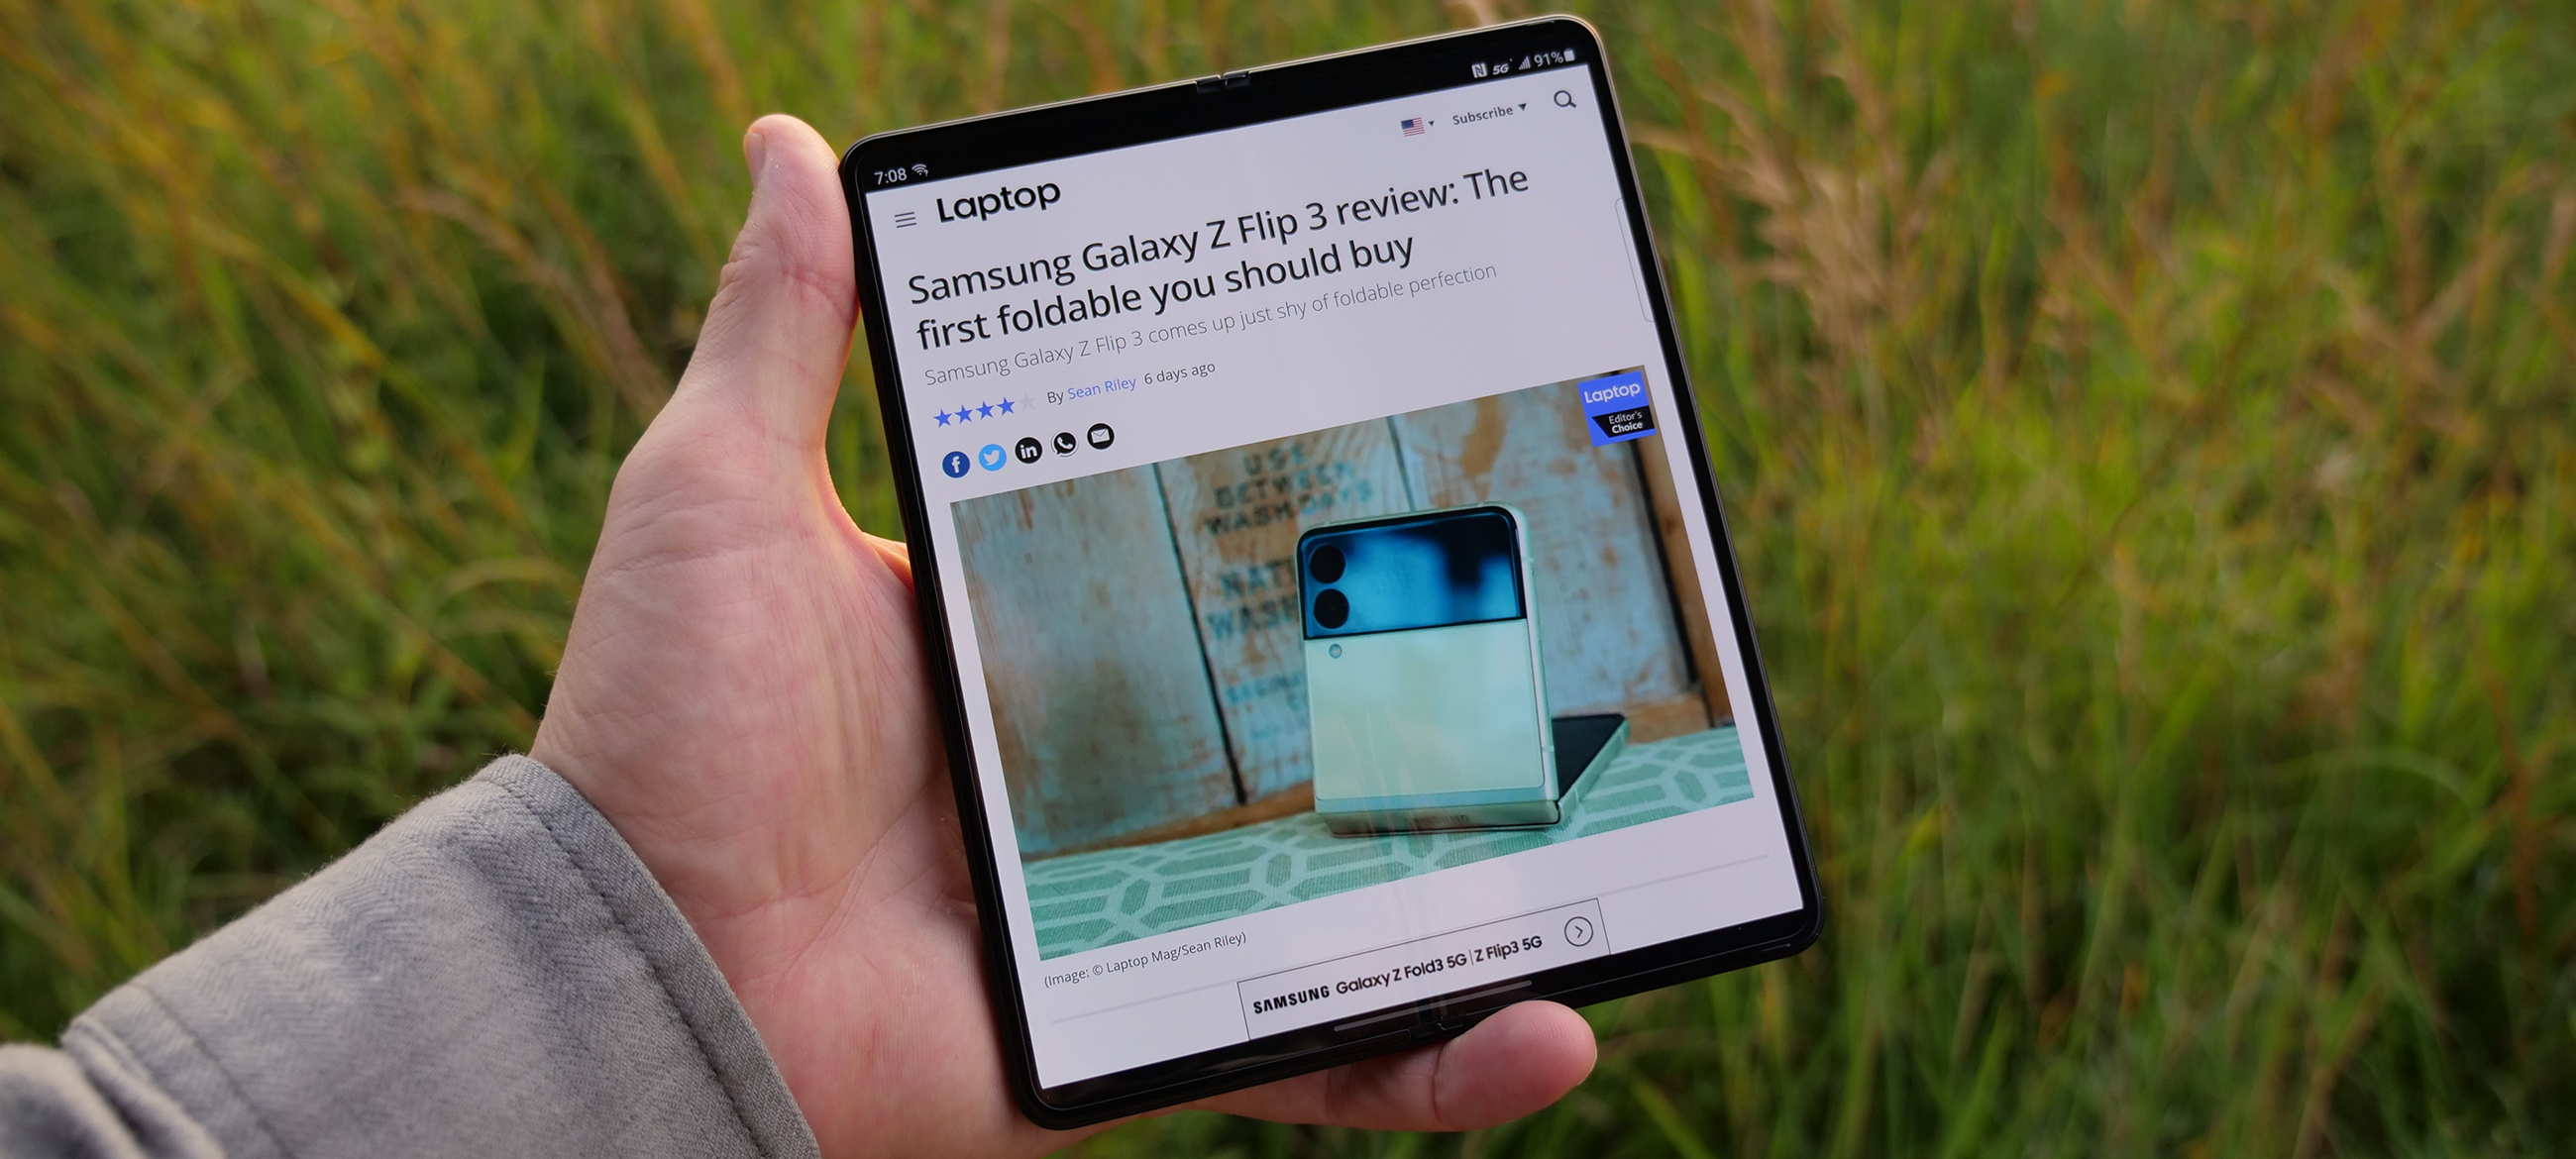 Samsung Galaxy Z Flip 3 review: The first foldable you may